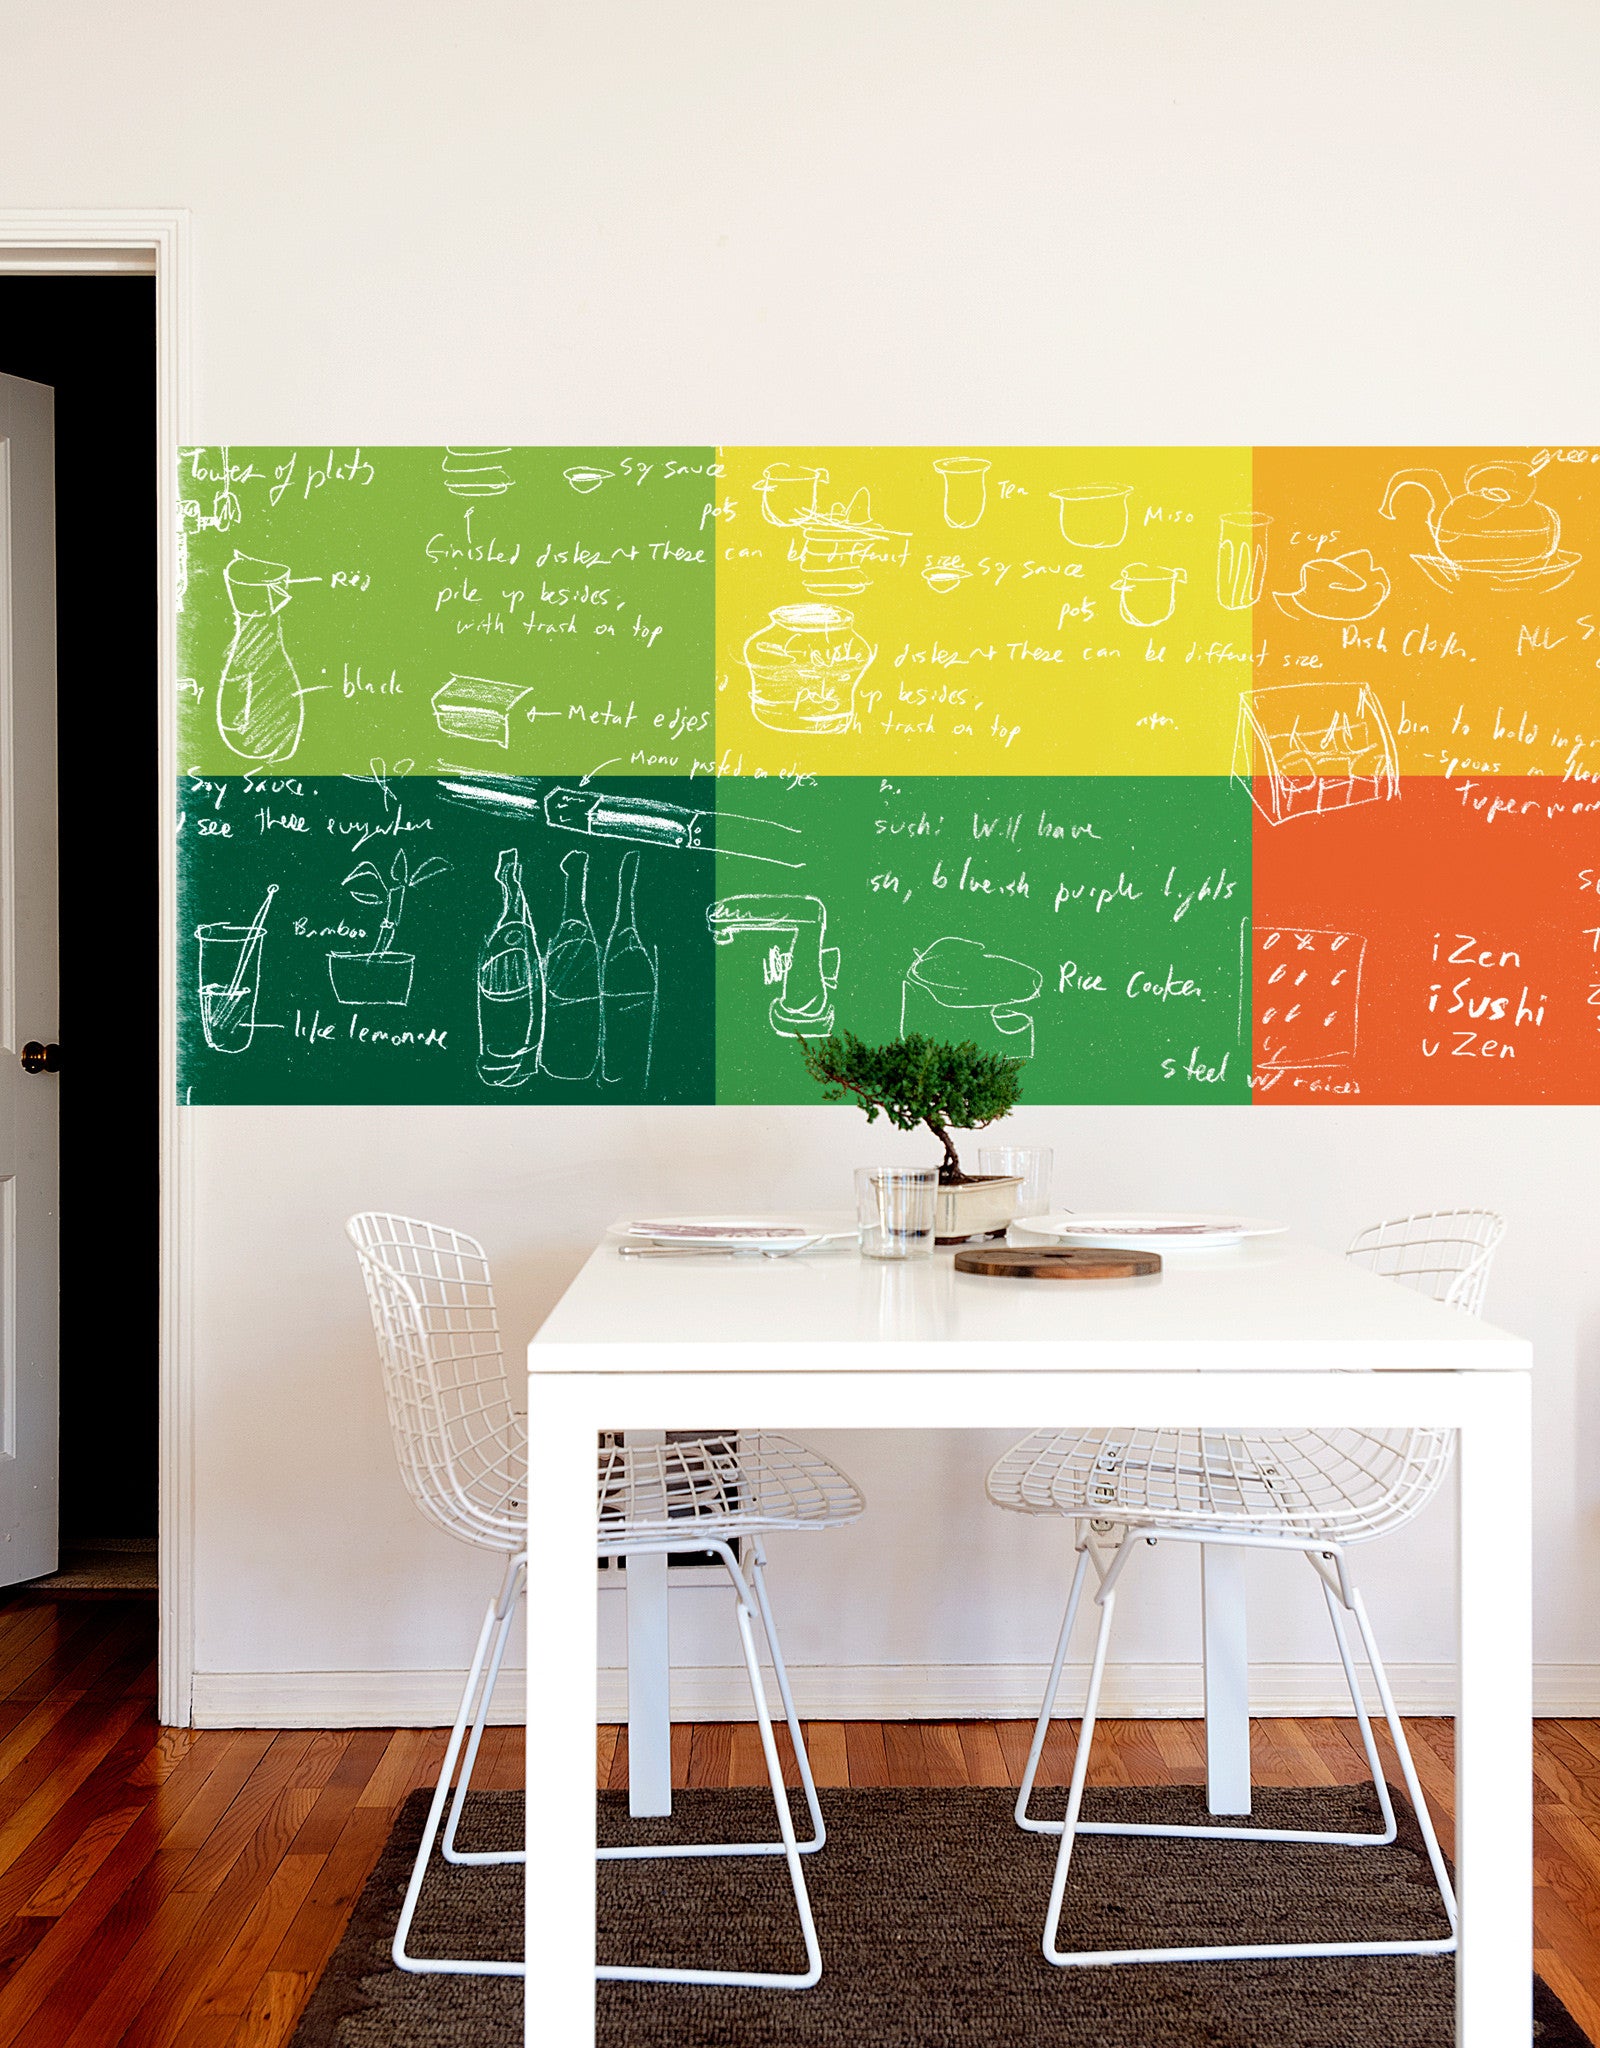 Chalkboard & Dry Erase Wall Decals & Stickers